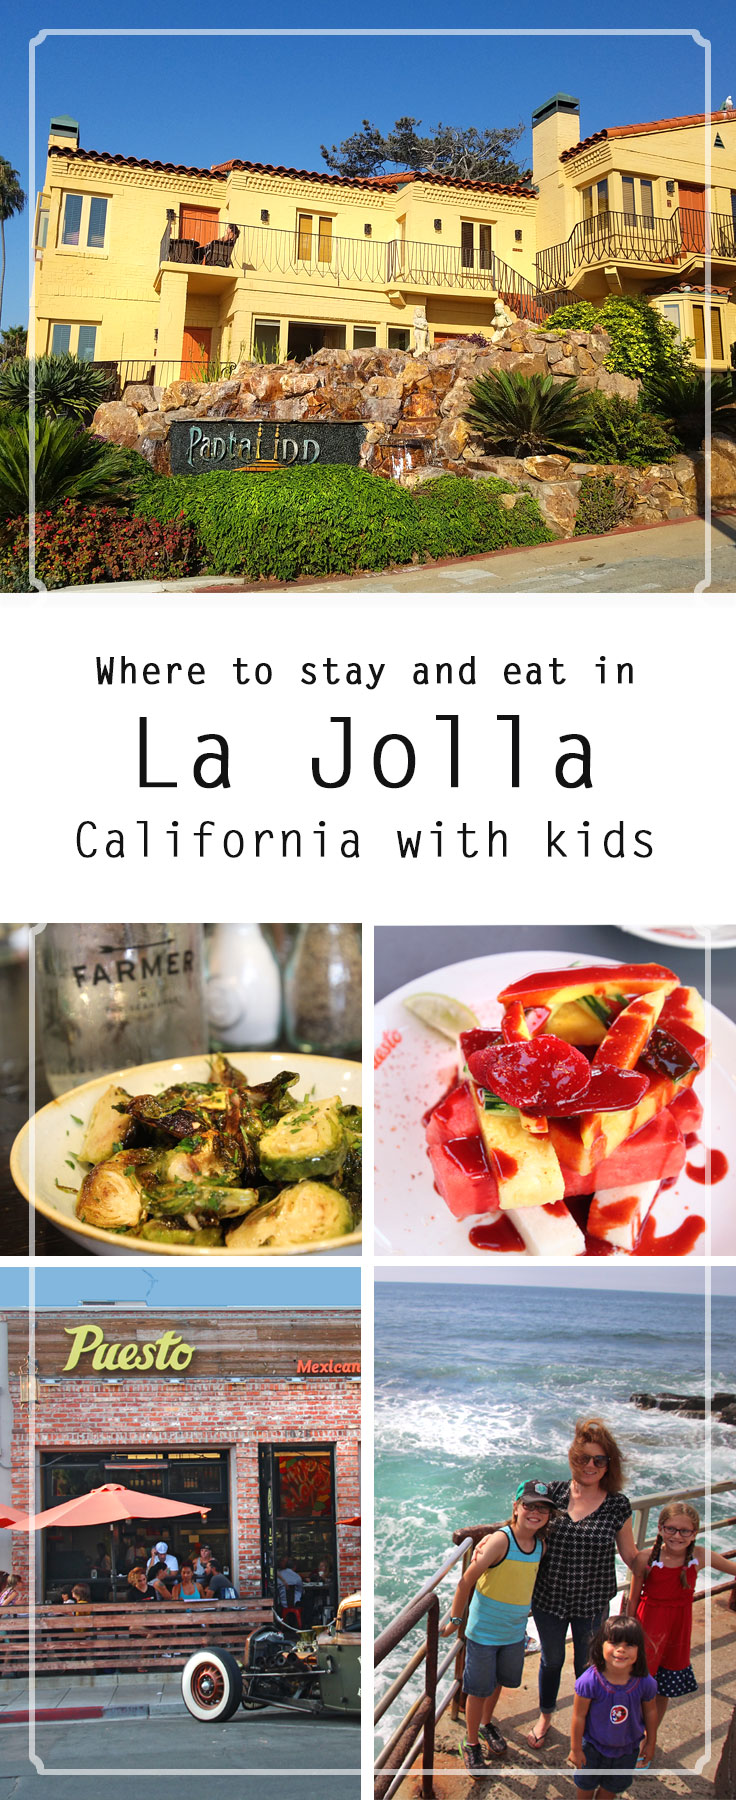 Where to stay and eat in La Jolla California with kids